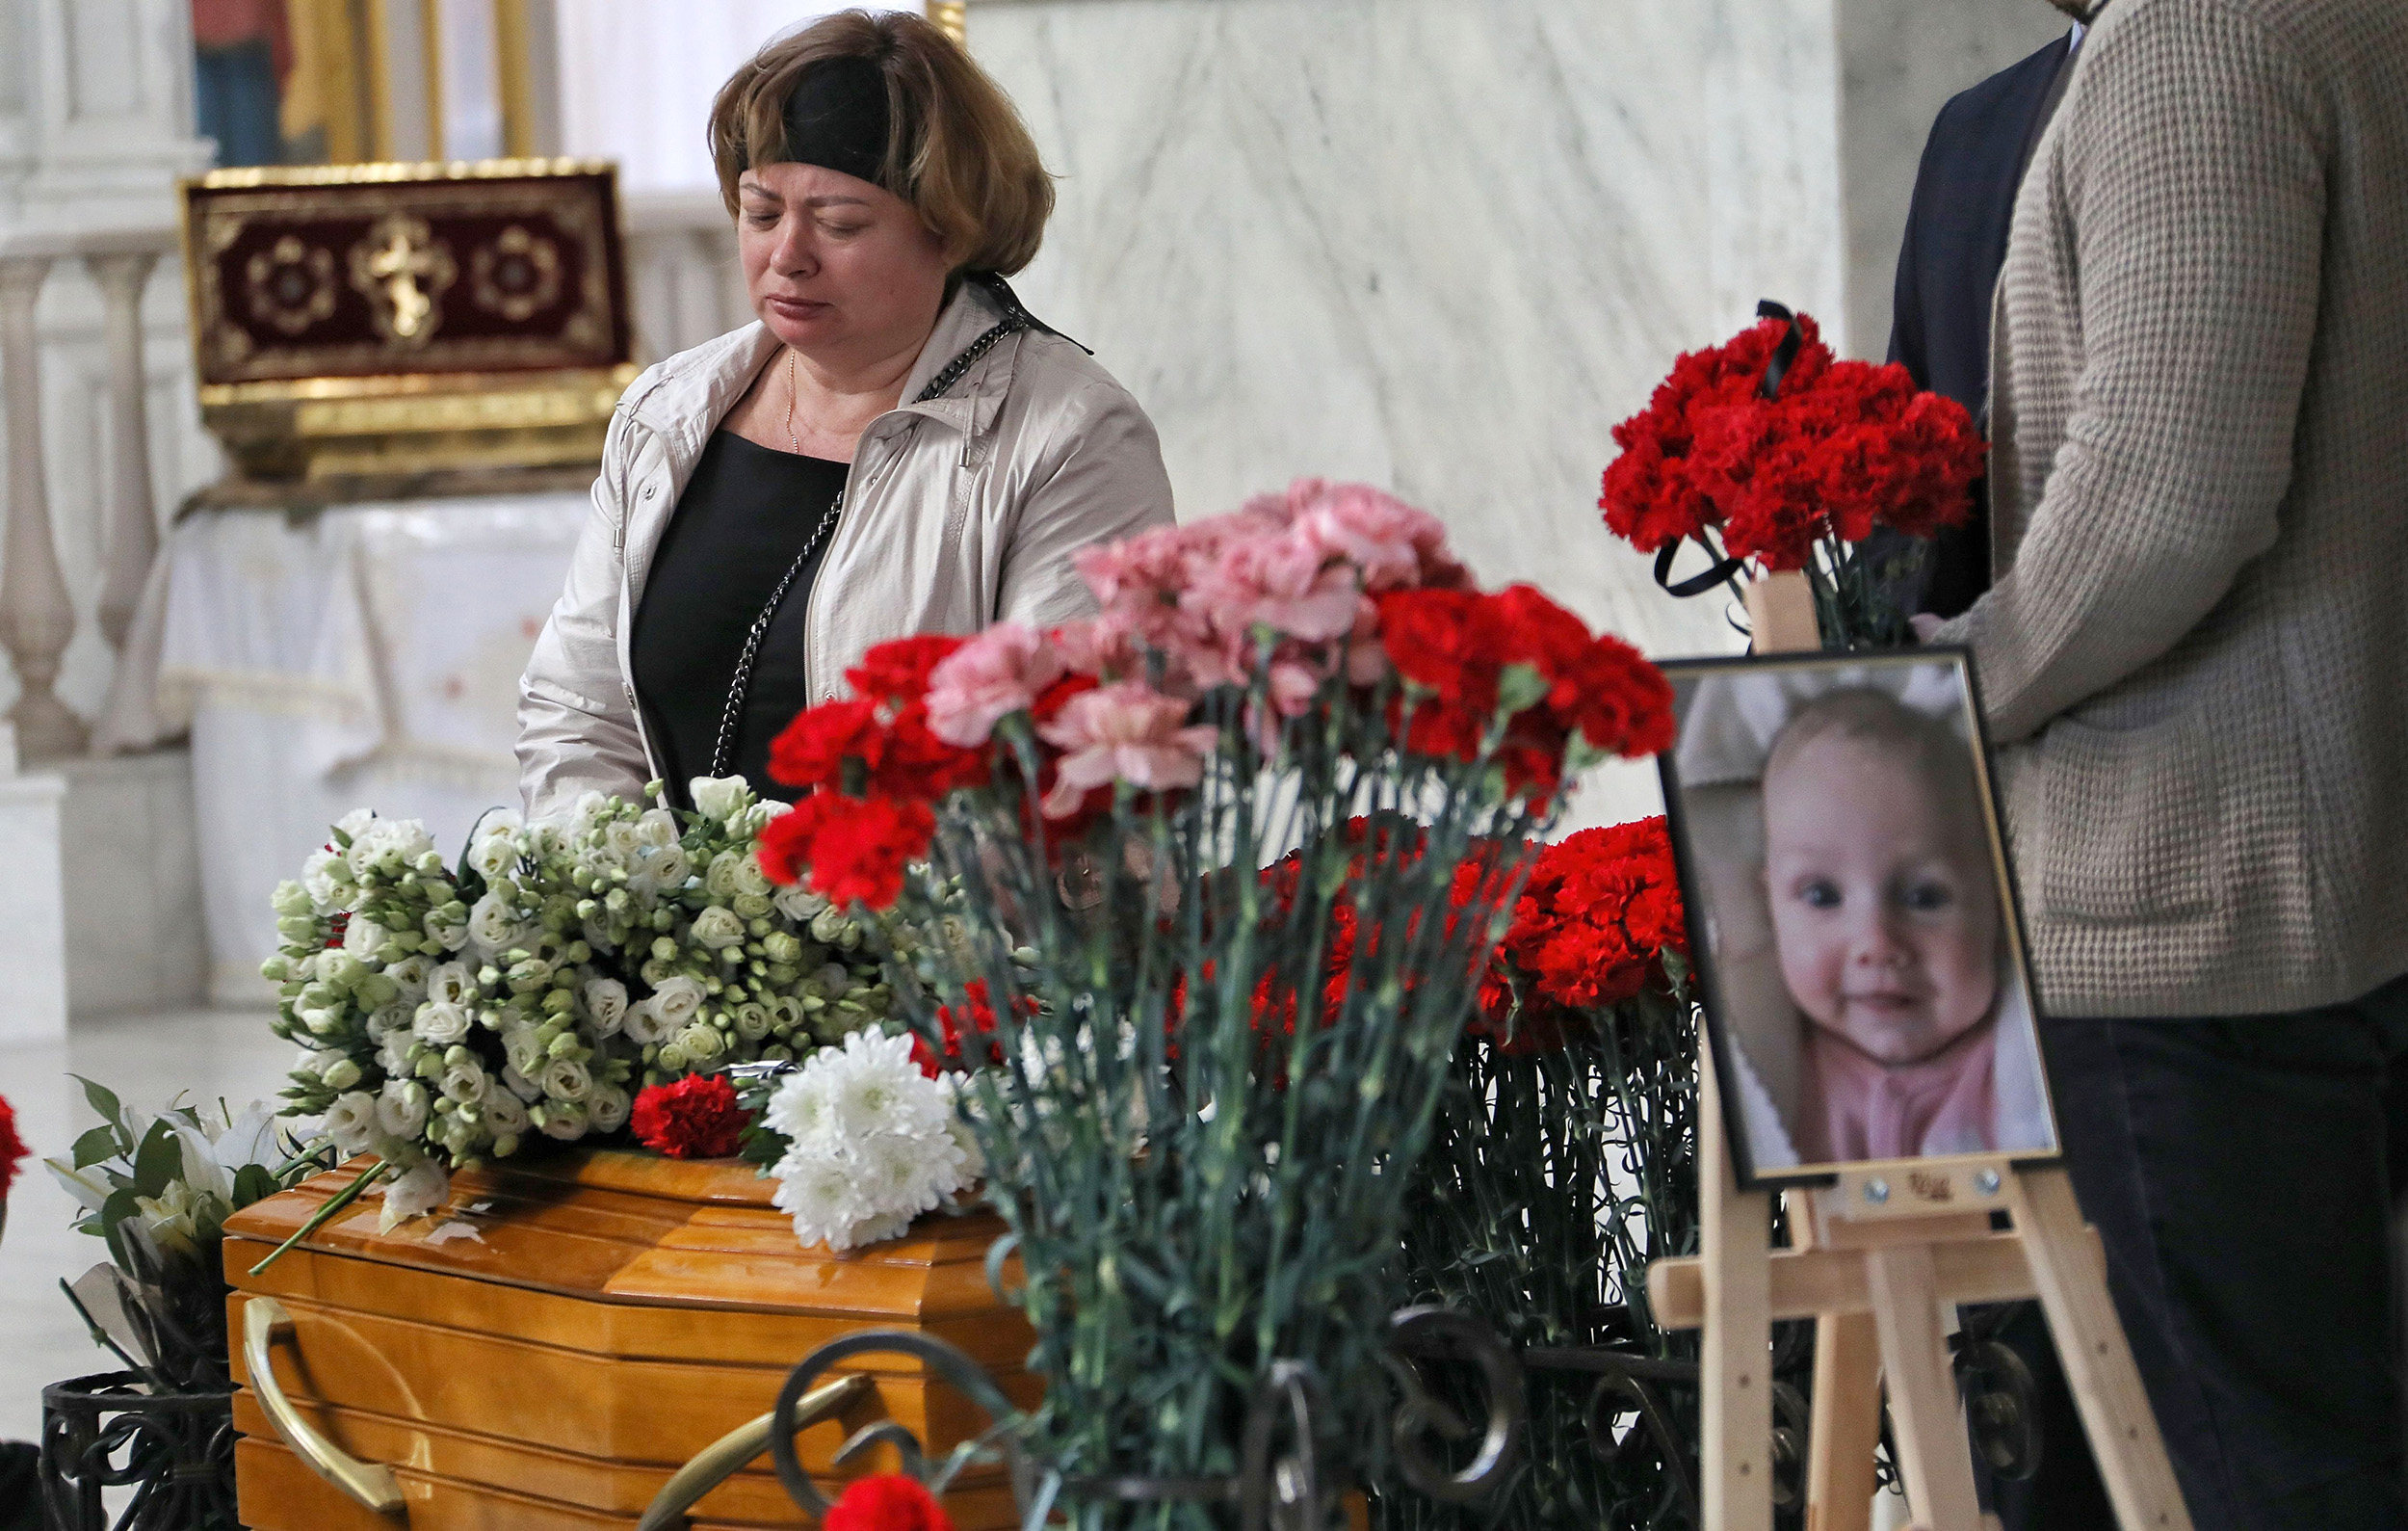 Relatives and friends are present during the funeral service of Valeriia Hlodan, her three-month-old baby girl Kira and her mother Liudmyla Yavkina at Transfiguration Cathedral, Odesa, southern Ukraine, on April 27. The women and an infant were killed after one of the Russian cruise missiles launched against Odesa hit an apartment block on April 23.